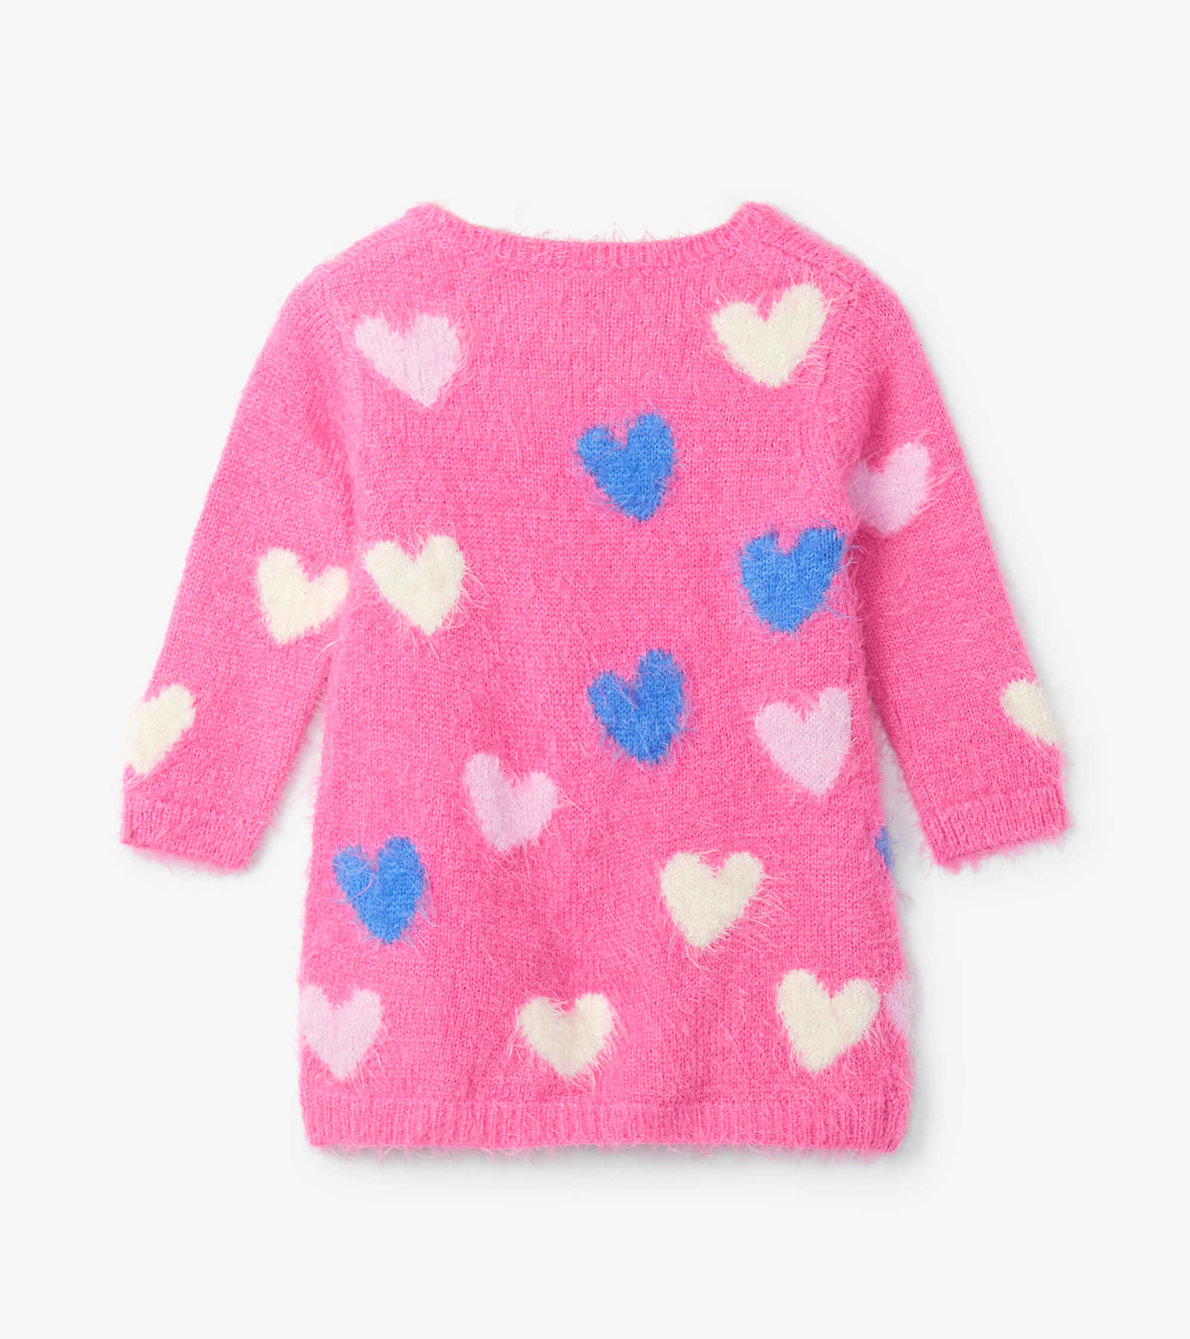 View larger image of Confetti Hearts Fuzzy Baby Sweater Dress